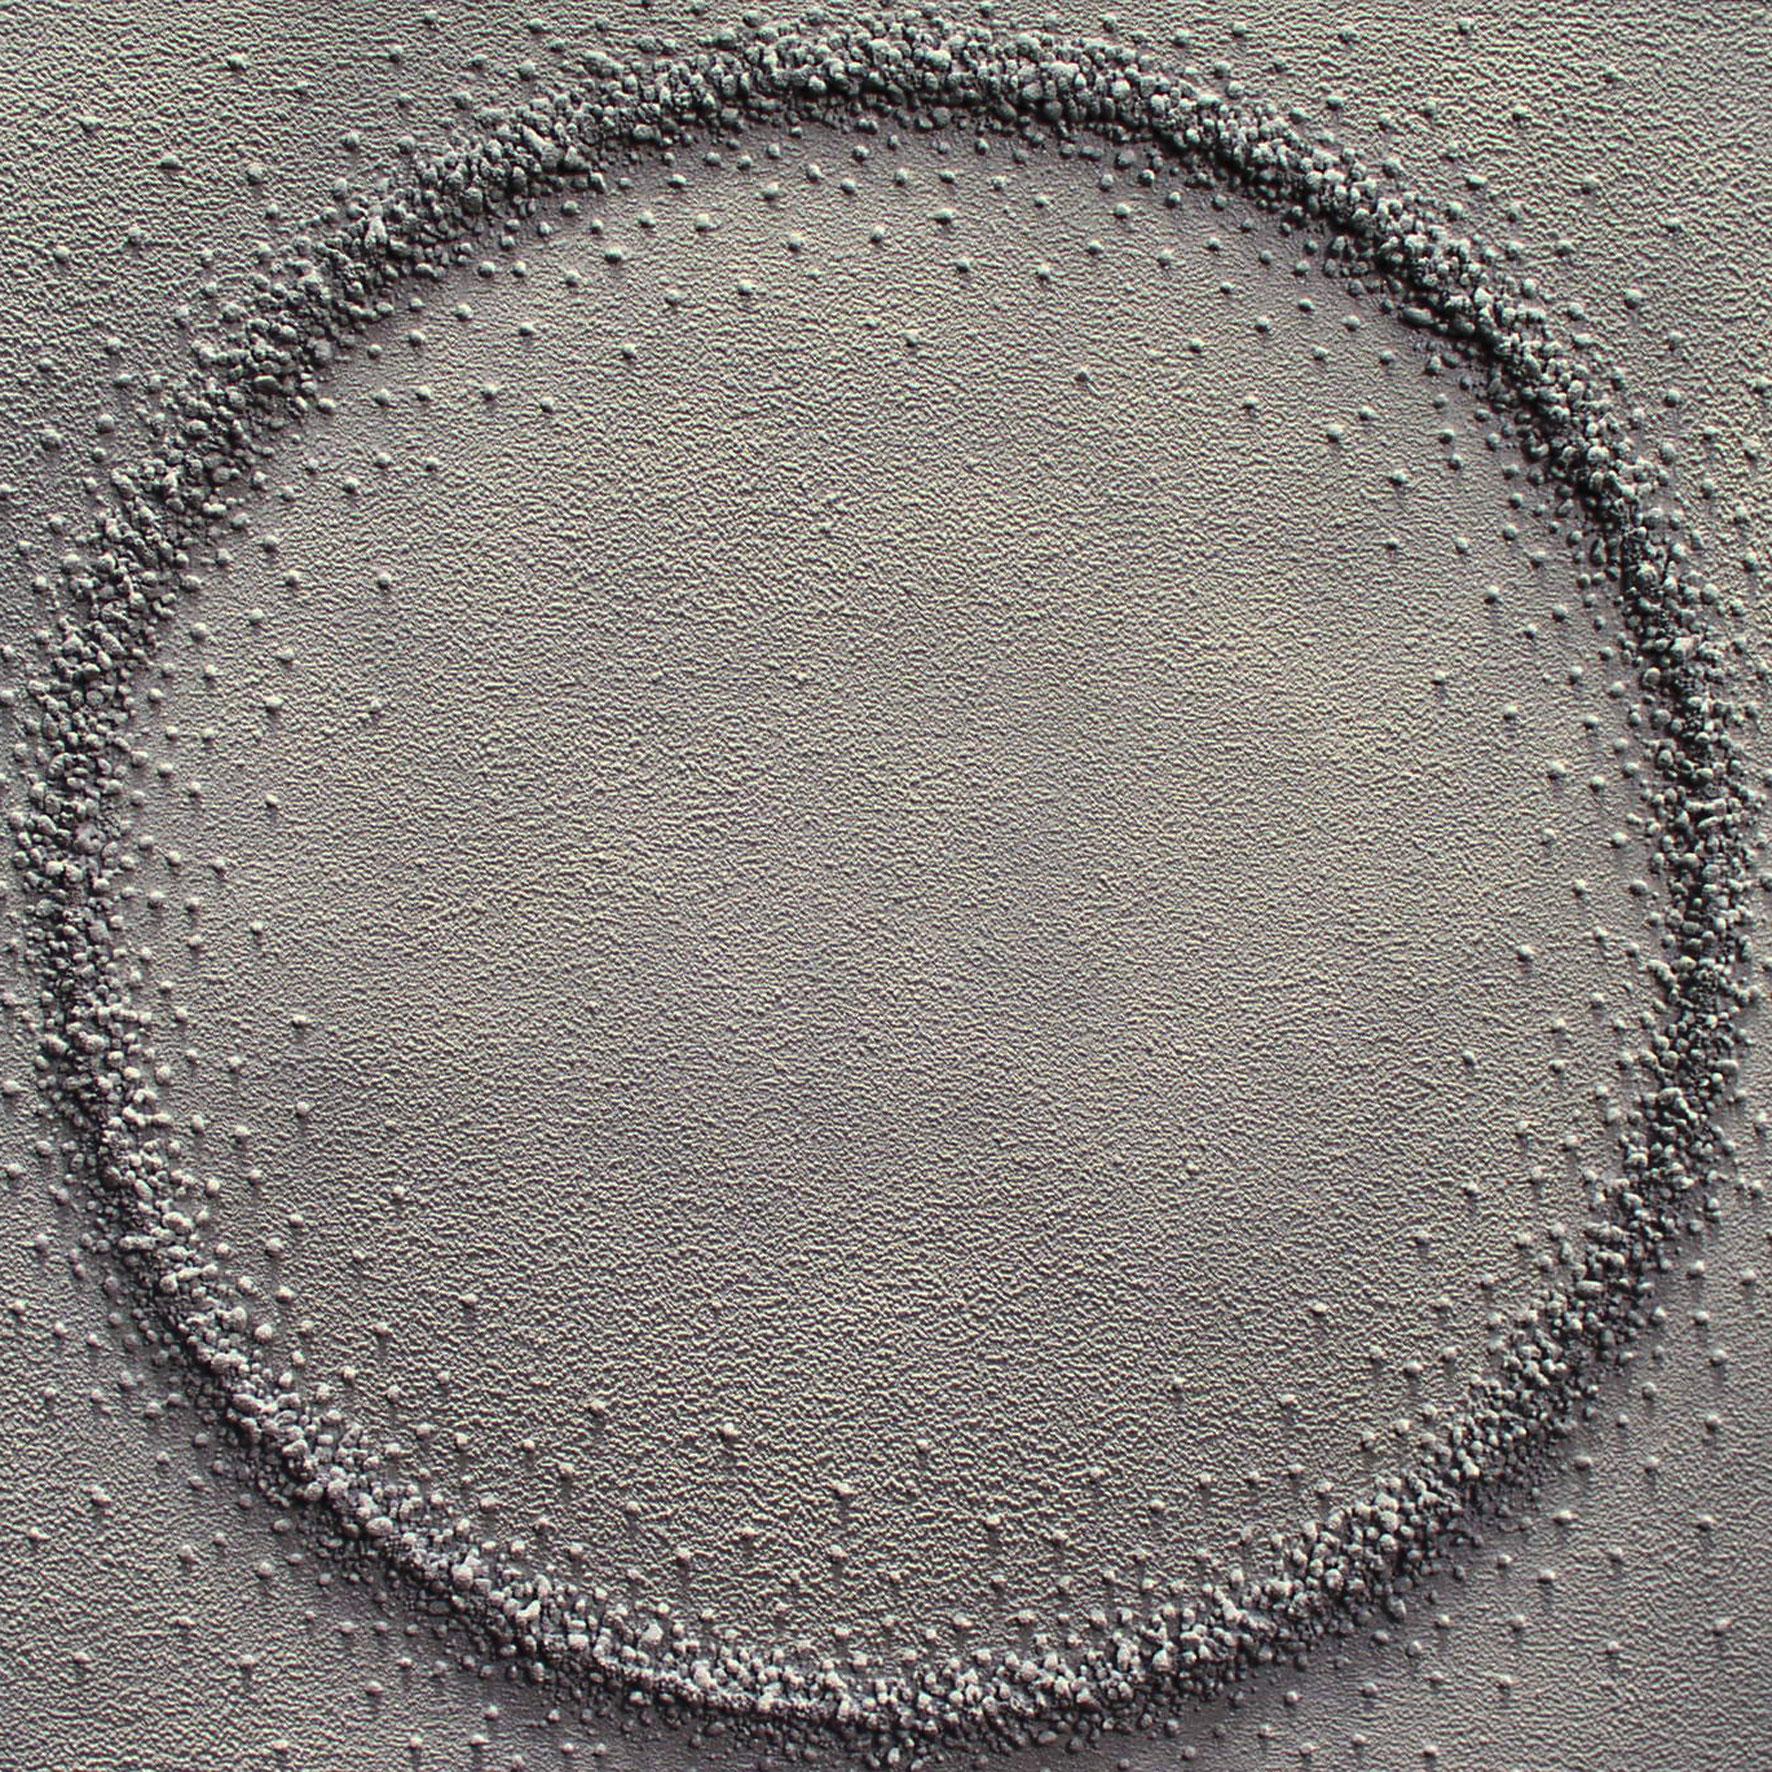 Martha Winter Abstract Painting - "Warm Earth Ring". Contemporary Mixed Media Painting